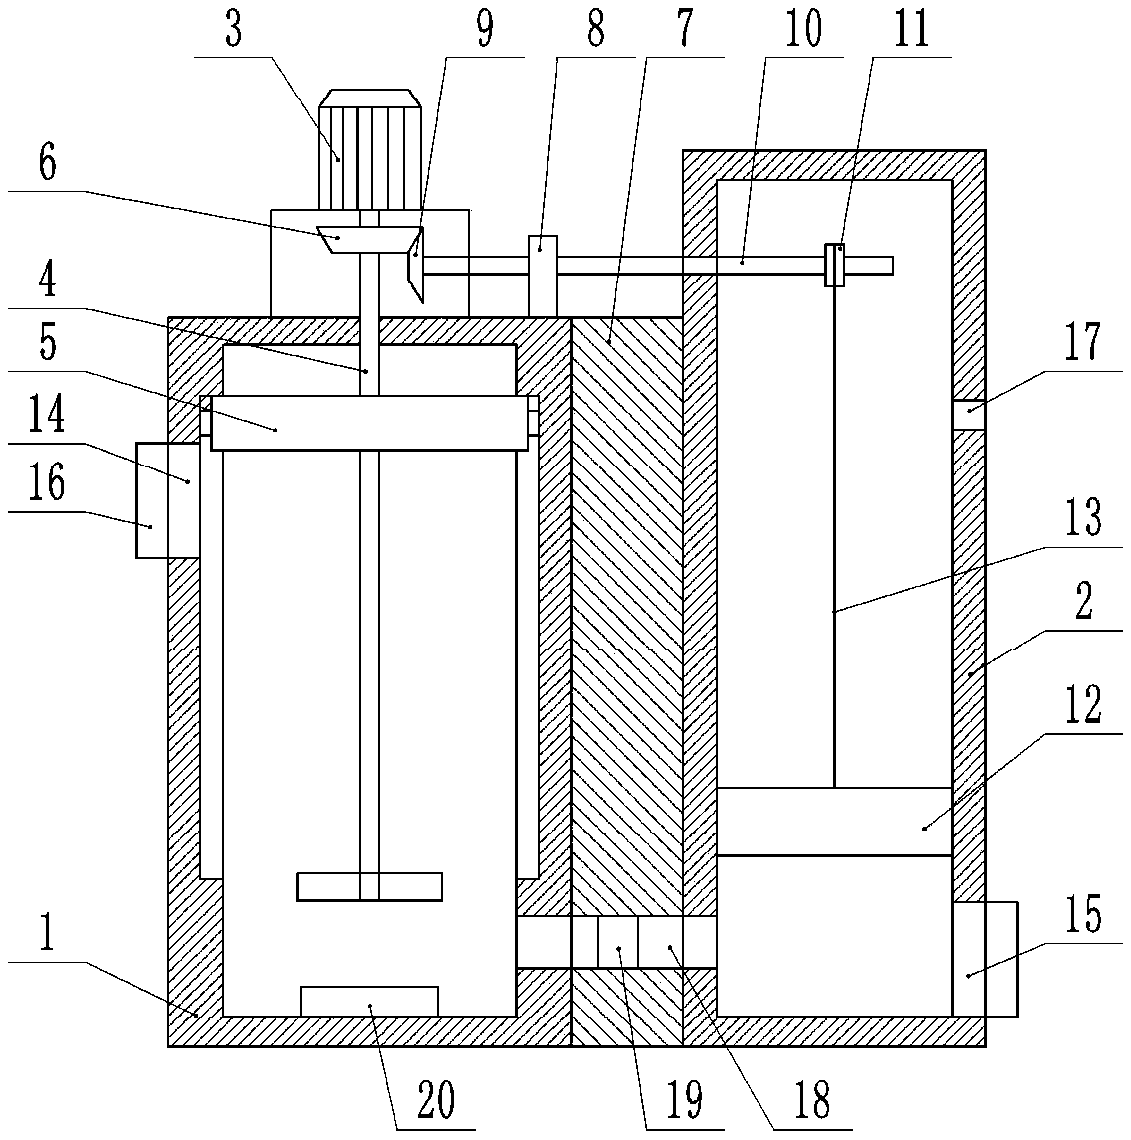 Method for reducing toxicity of antibiotic wastewater through flash evaporation